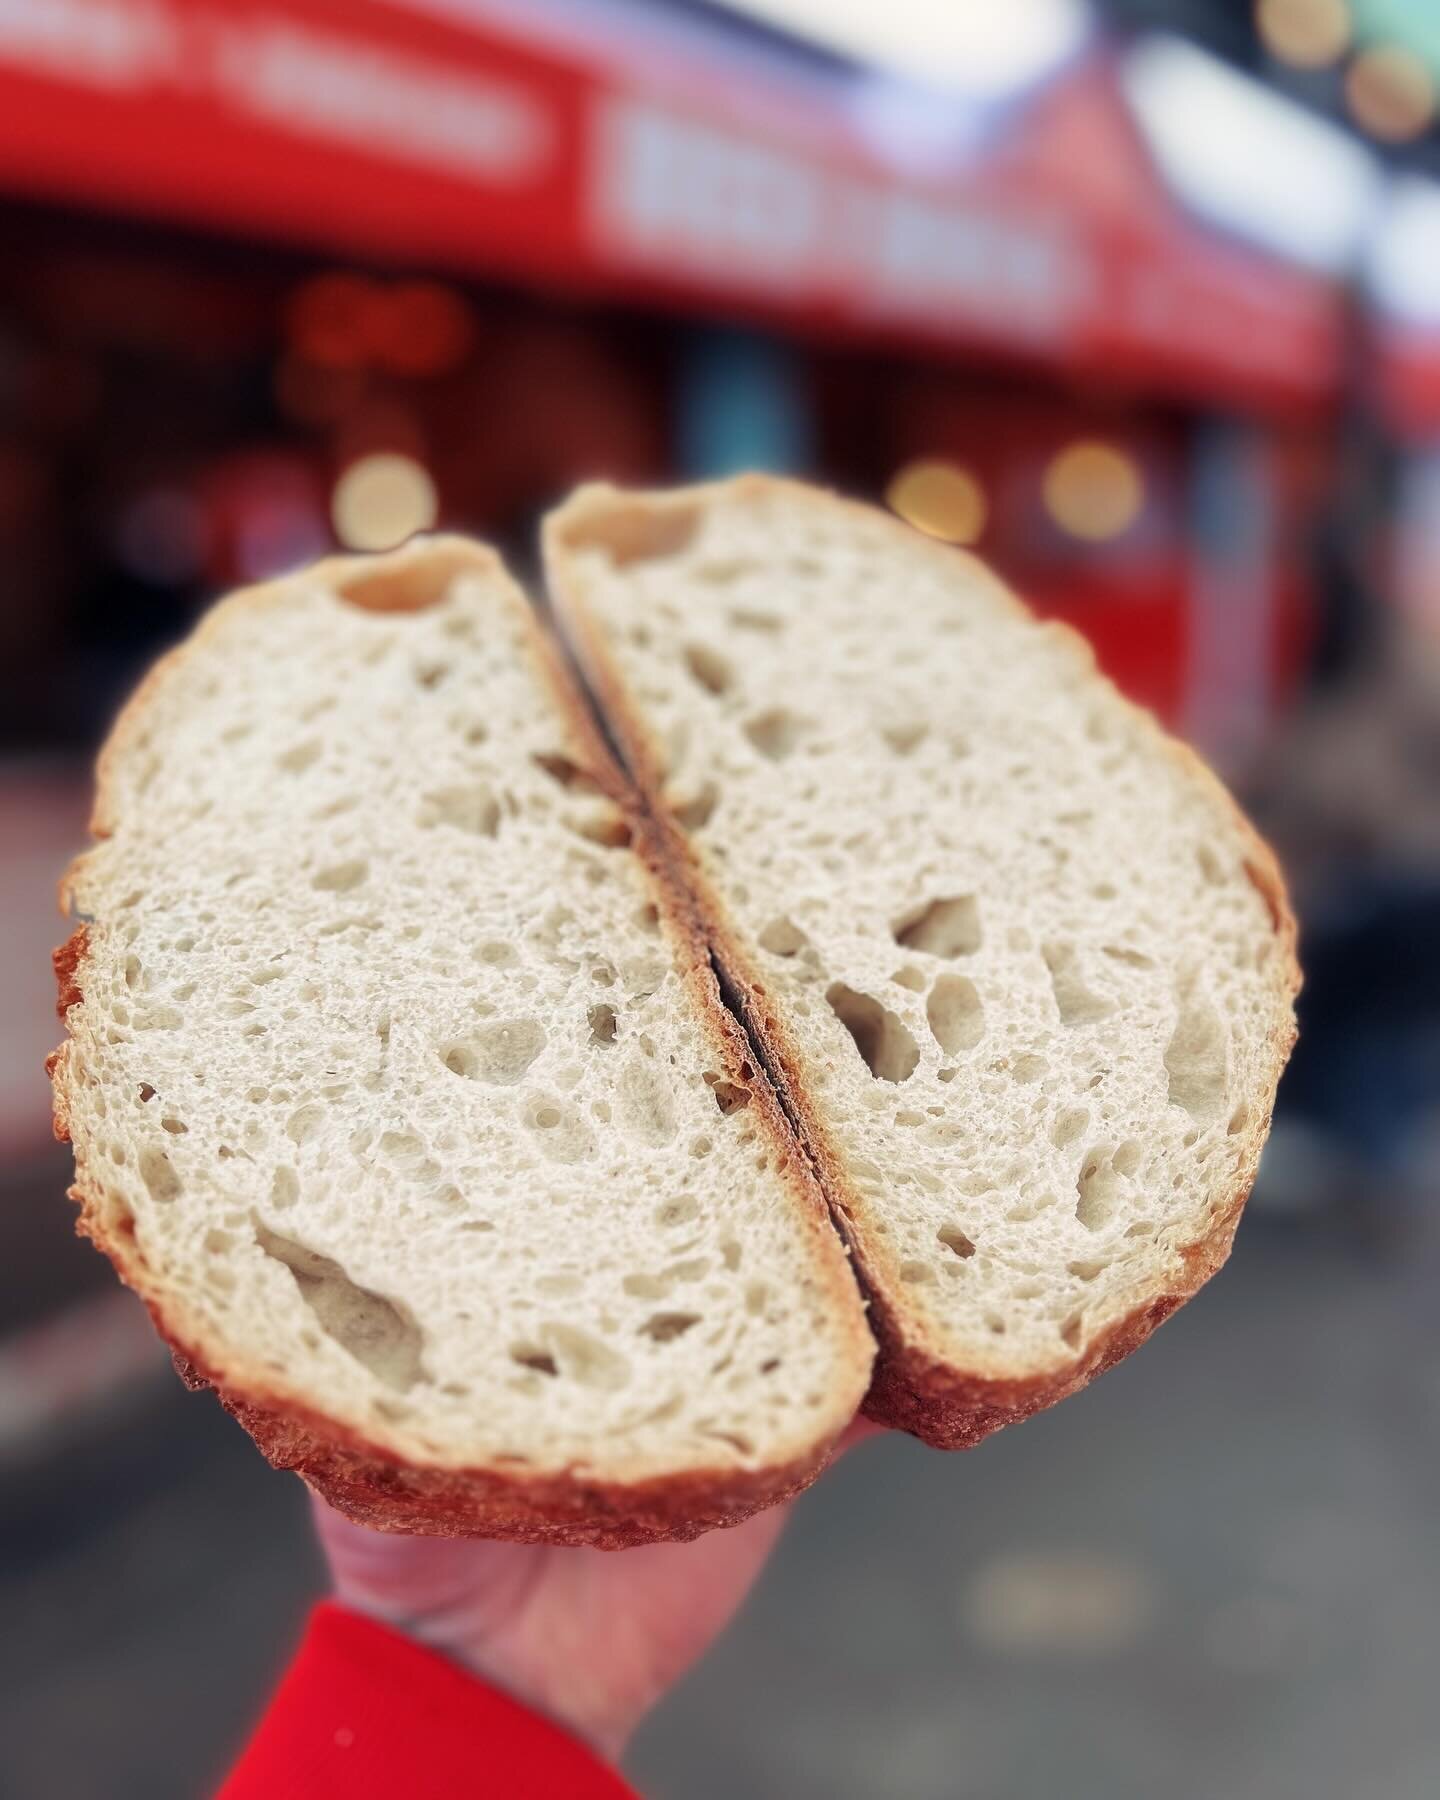 Game changer! Now rockin&rsquo; Sourdough 🍞 

It&rsquo;s about time eh! You&rsquo;ve been asking for it &amp; we have finally found a Sourdough we&rsquo;re happy with!

We won&rsquo;t be shy with it either, you&rsquo;re getting a thick cut that is l